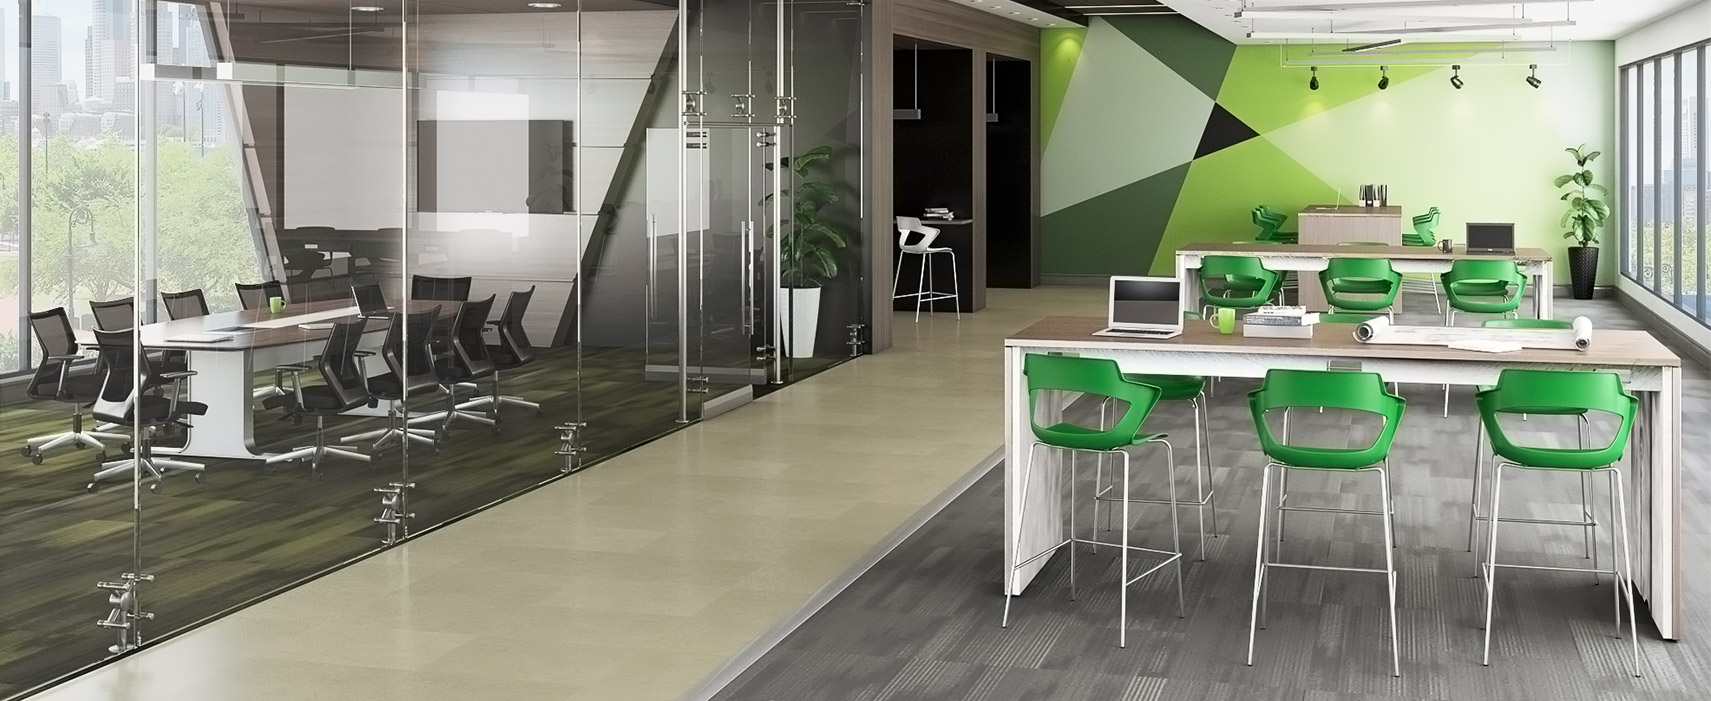 Multifunctional Office featuring Zee bar stools with green & white shells.